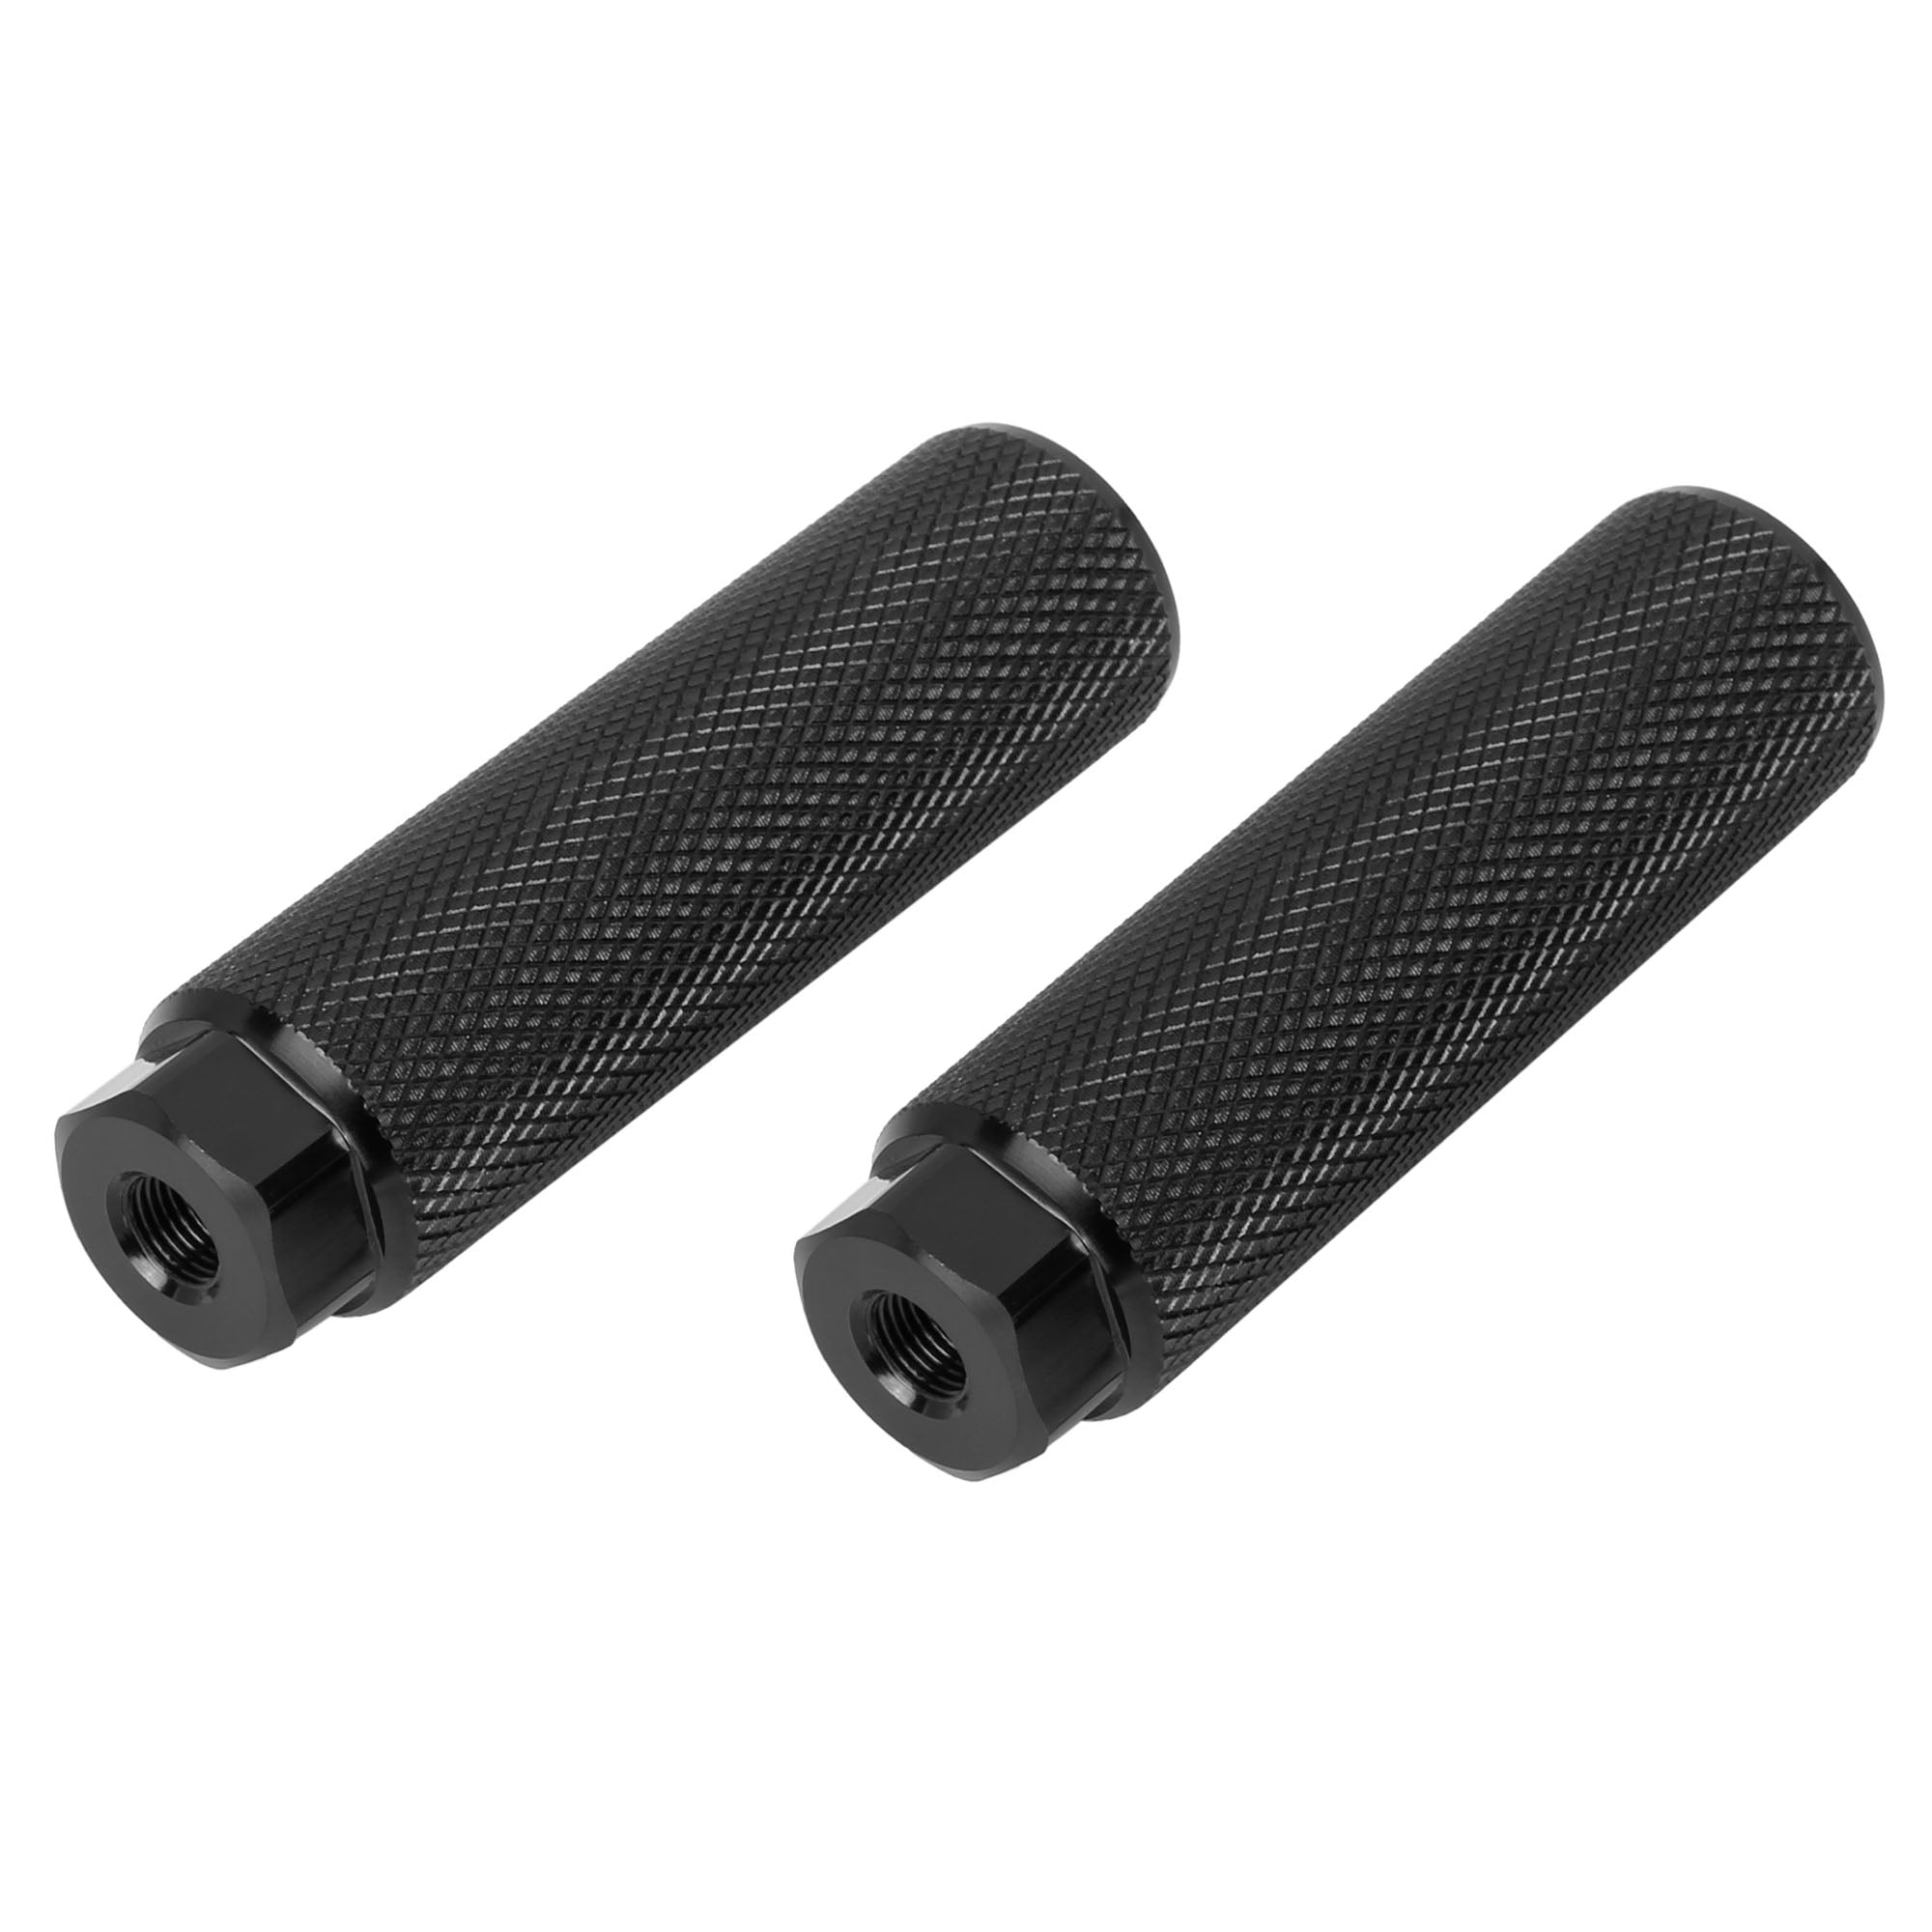 2PCS Brand NEW Axle Foot Pegs For BMX Bike Bicycle Cycling New US 